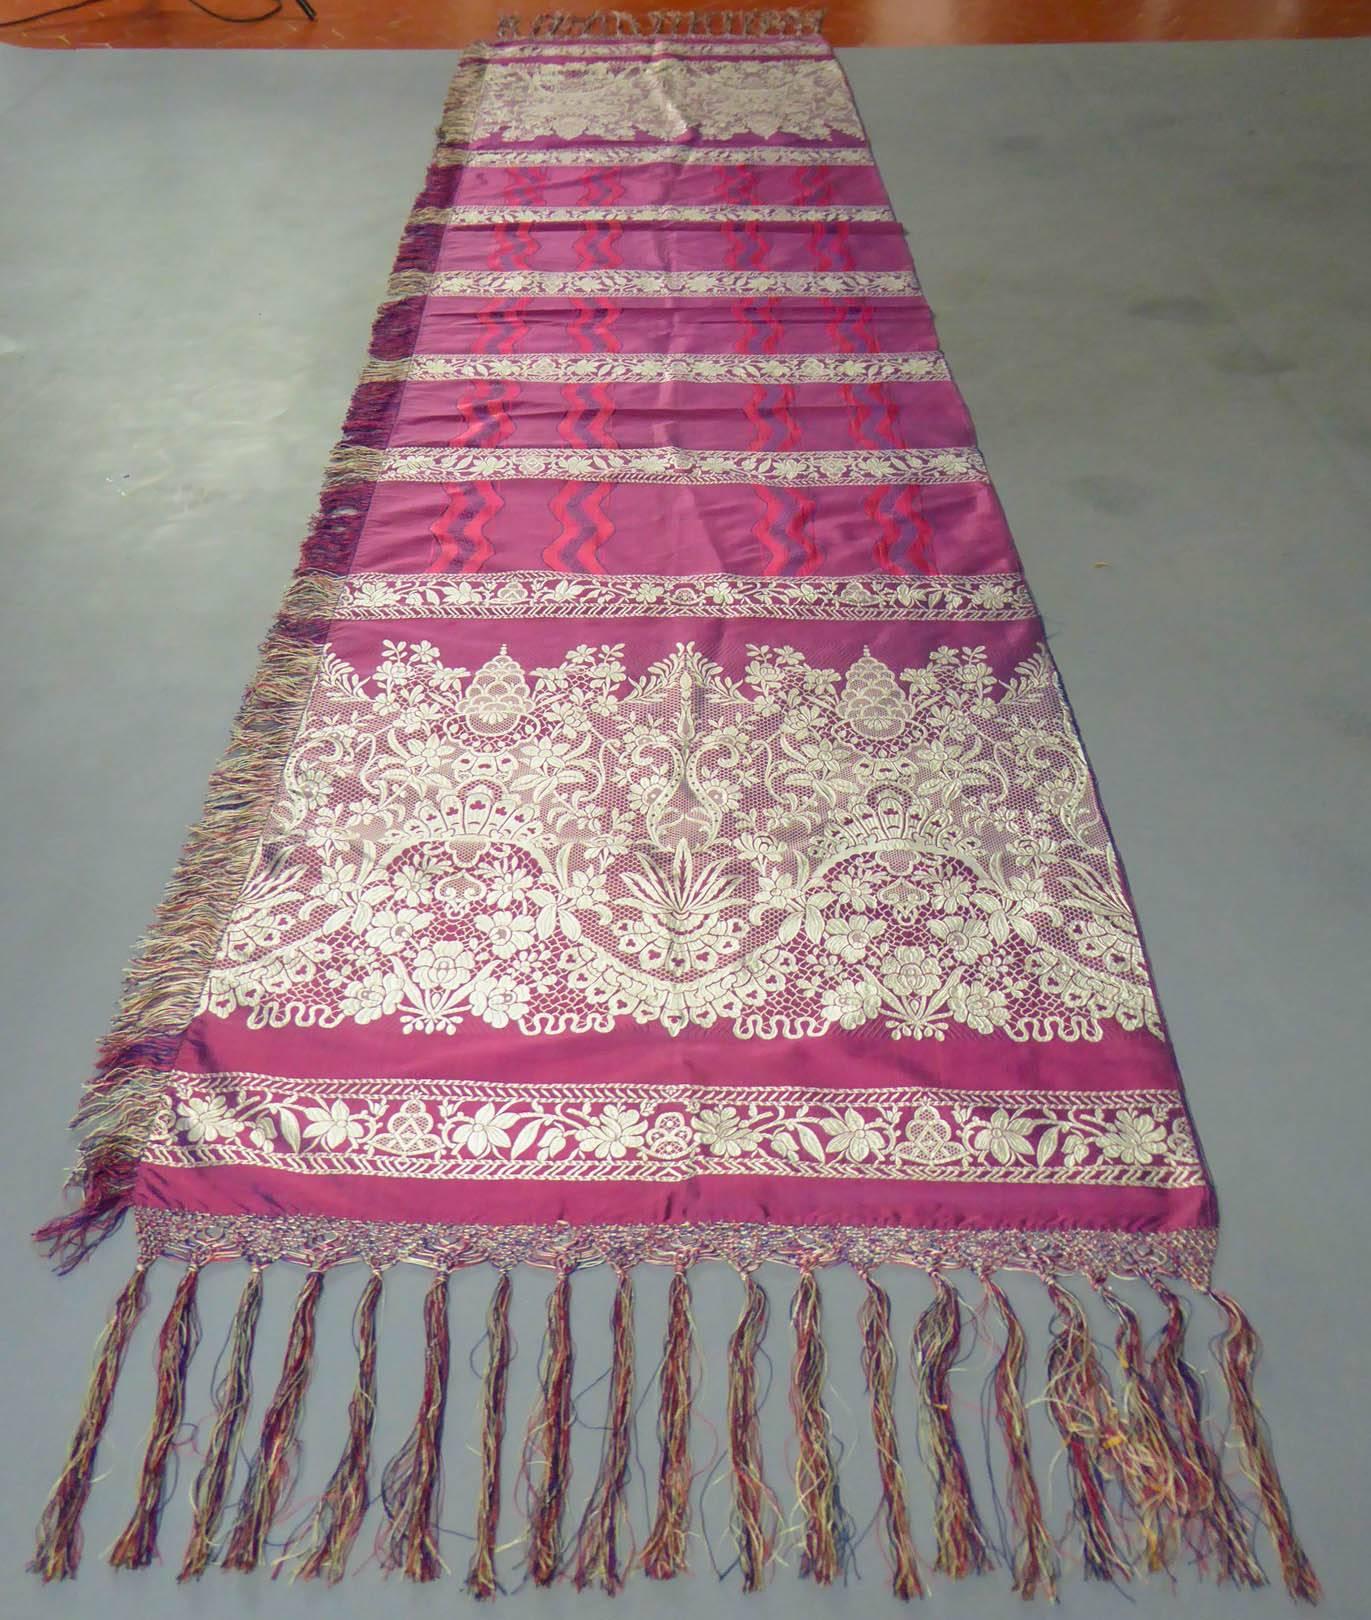 Circa 1860

France Lyon

A surprising woven stole with a lace decoration from an unidentified Lyonnais factory dating from the Second Empire. Silk lampas with silver plaited border and plum taffeta. Decor with ruffles of lace and ribbons of waving